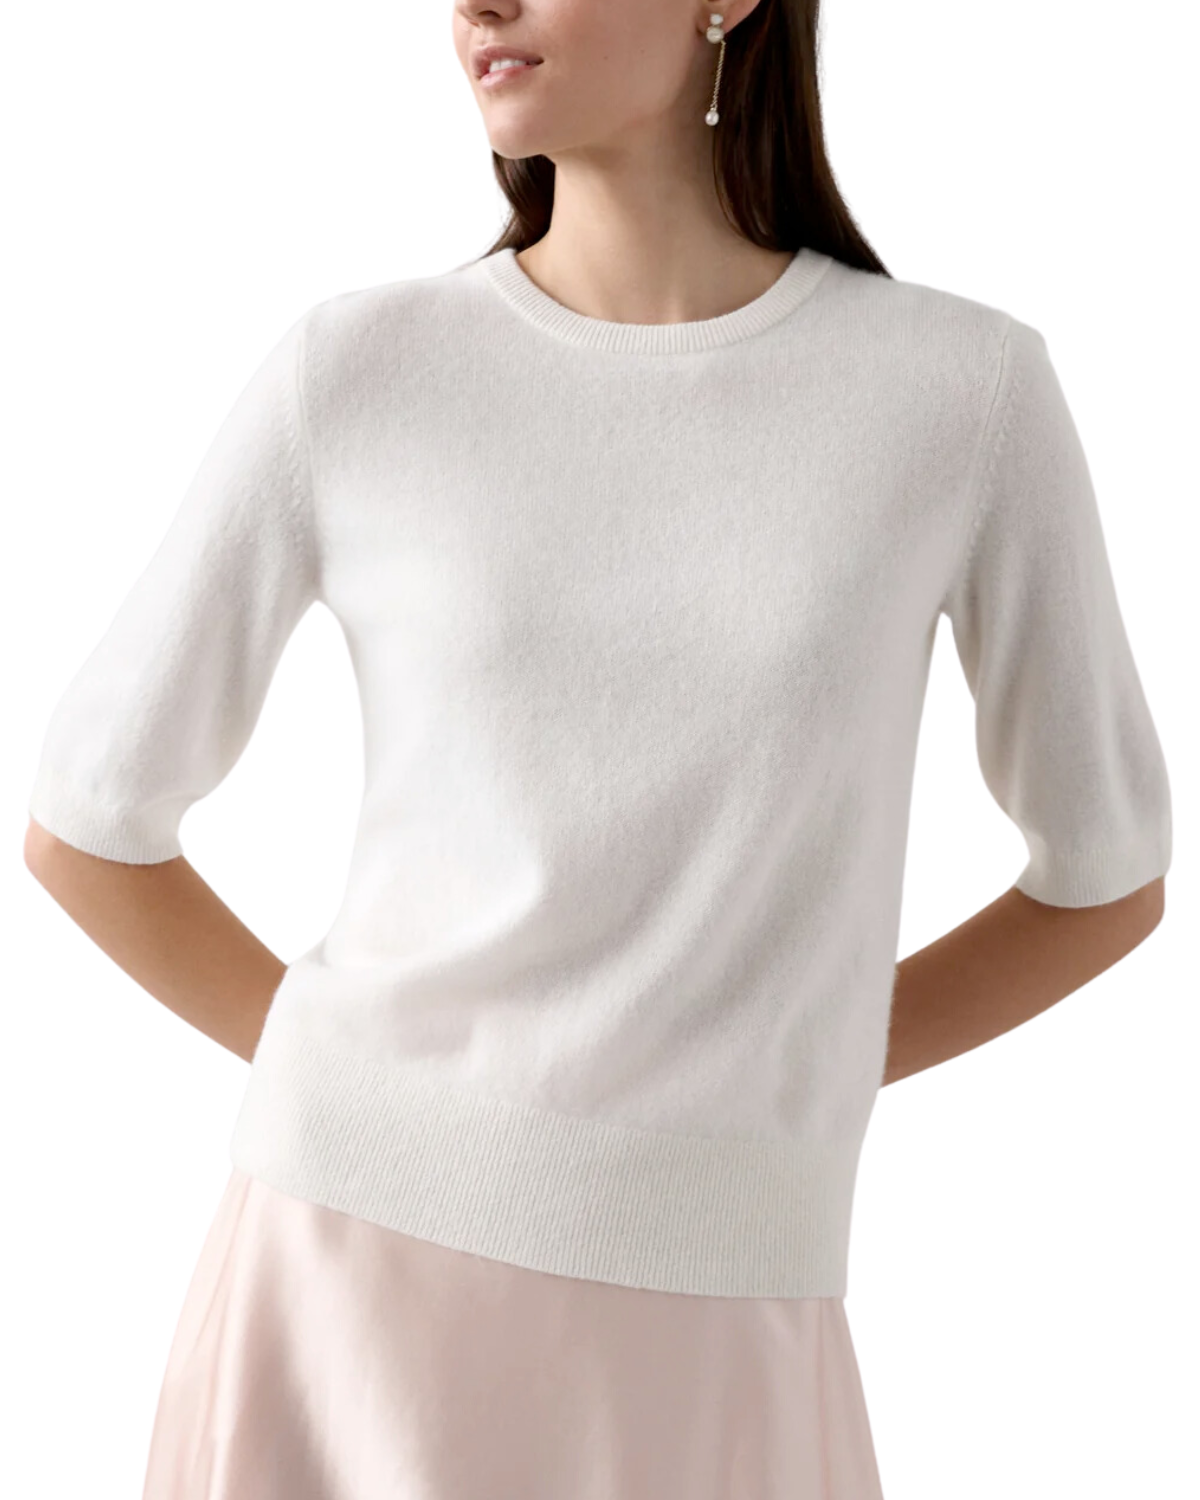 Cashmere Elbow Sleeve Sweater (Soft White)